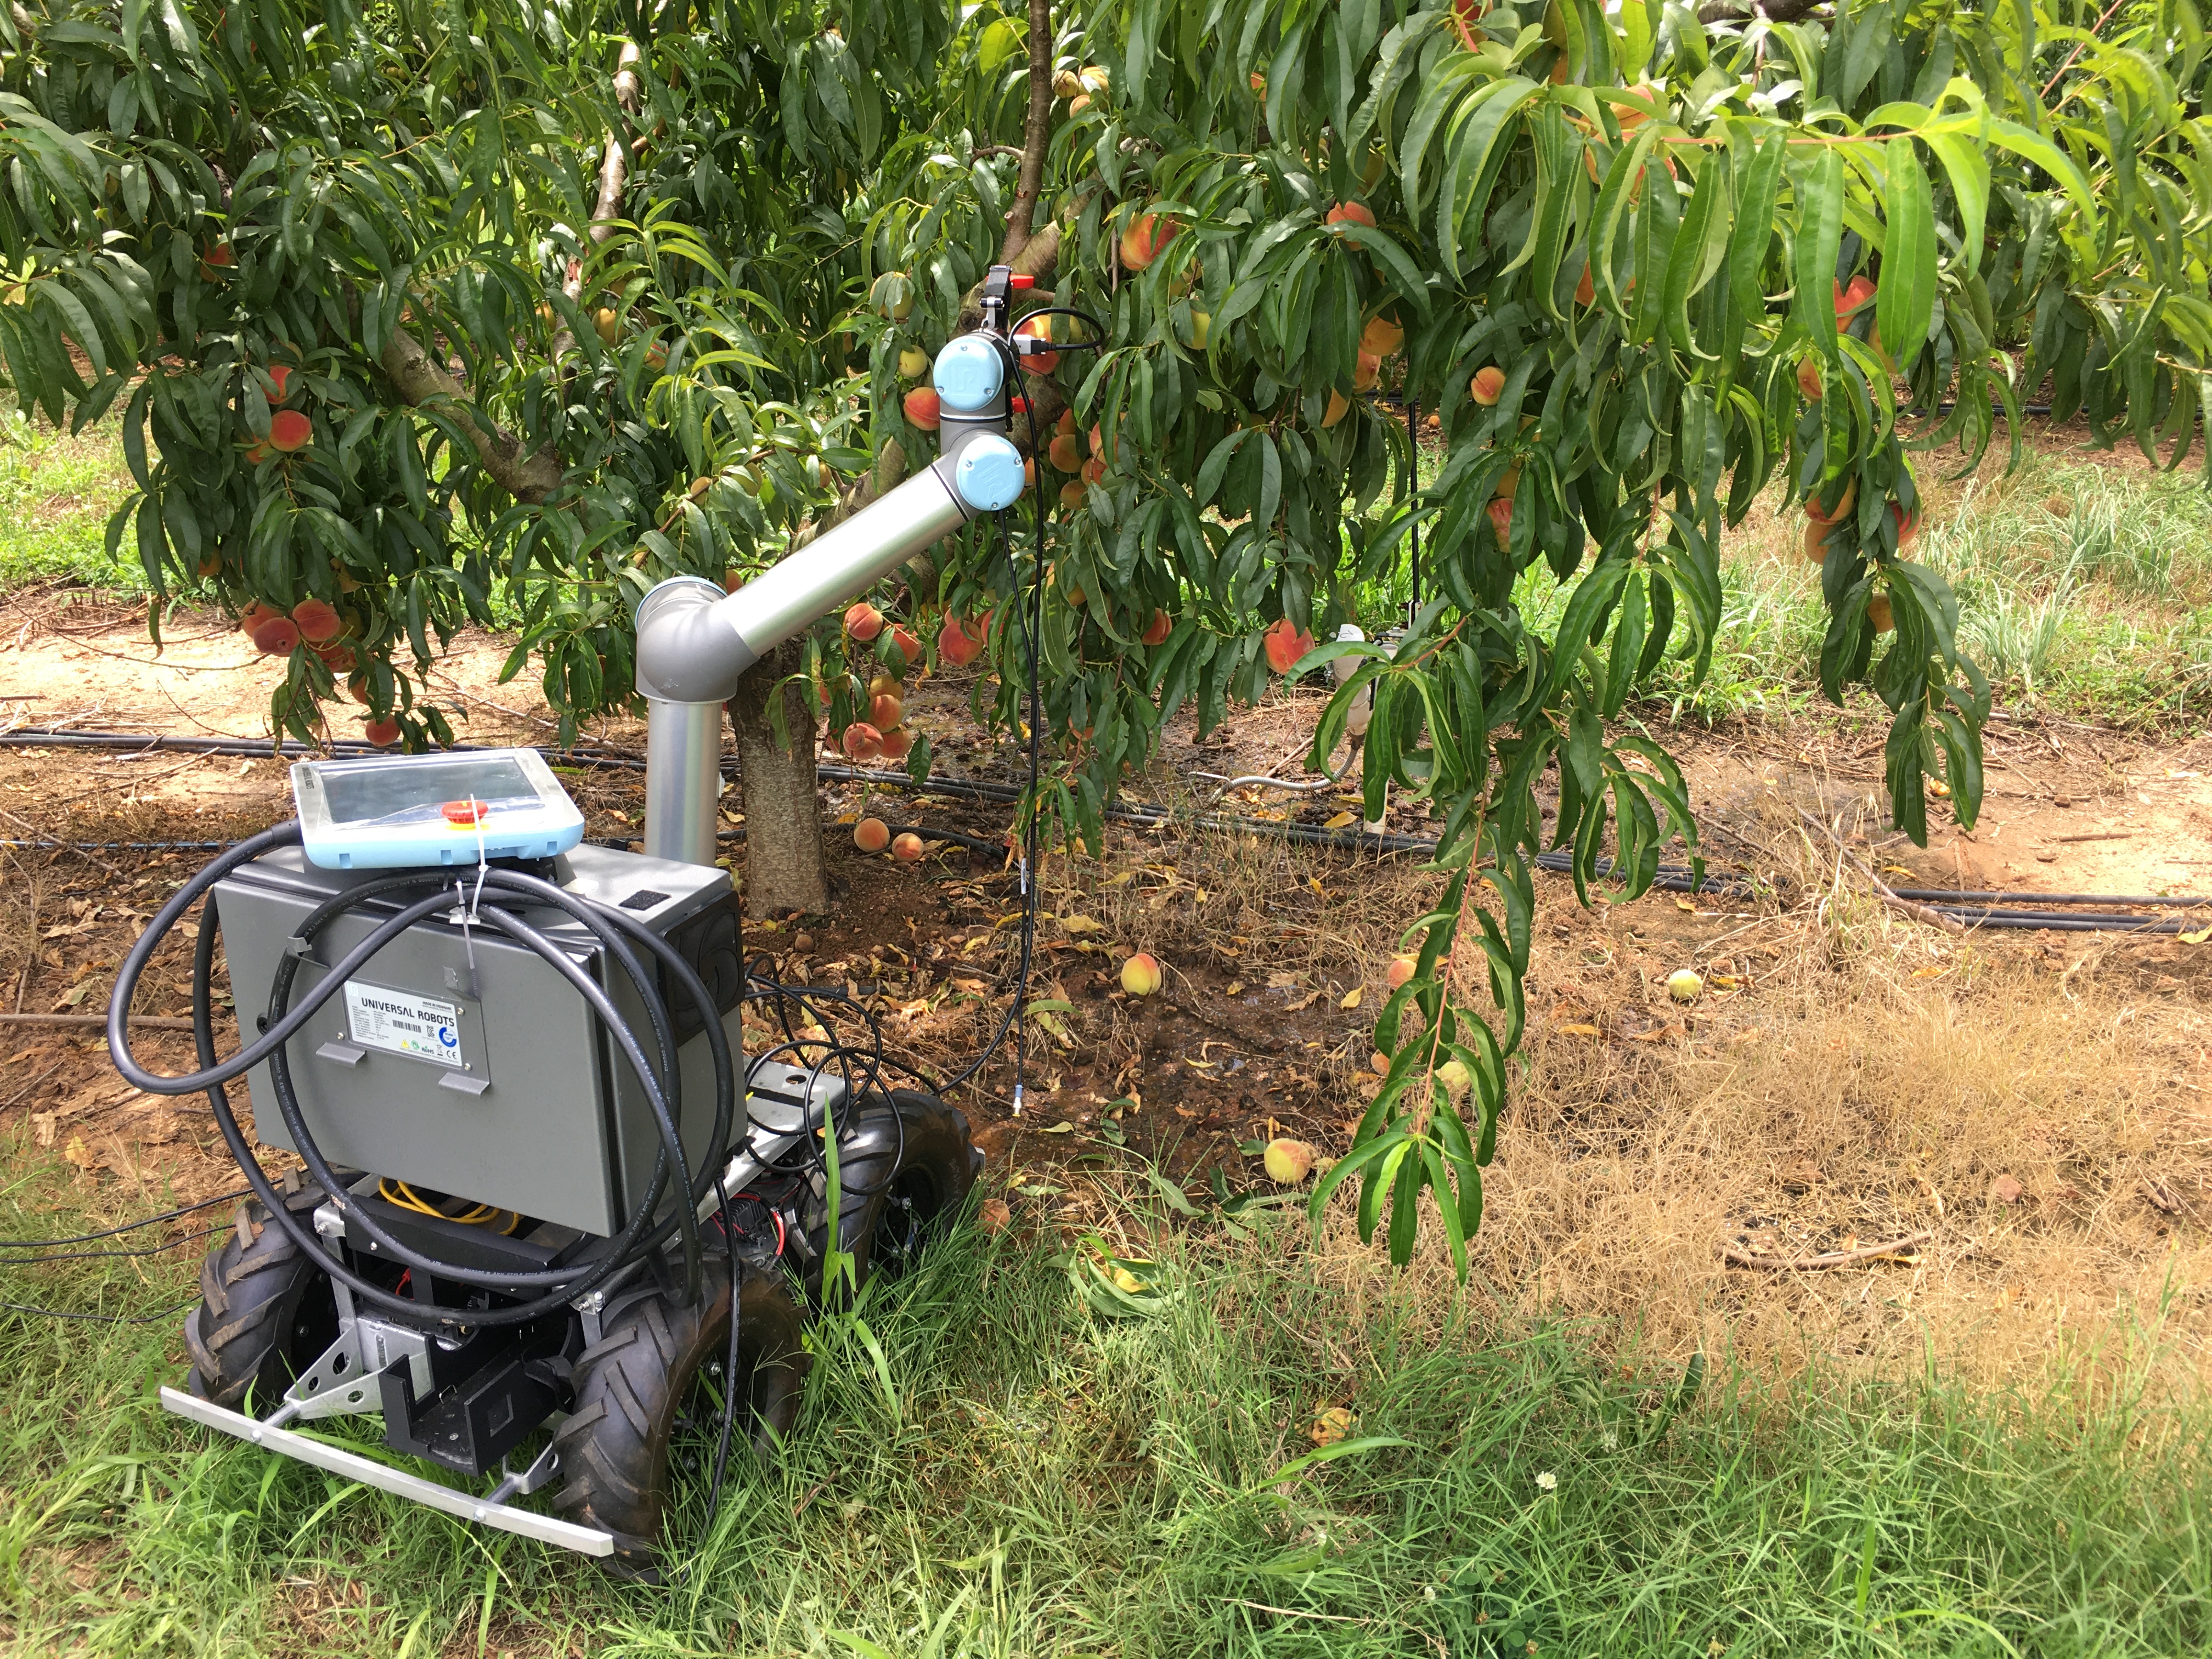 The robot uses a combination of LIDAR remote sensing and GPS technology to self-navigate through a peach orchard. Once the robot arrives at a peach tree, it uses an embedded 3D camera to determine which peaches need to be pruned or thinned.